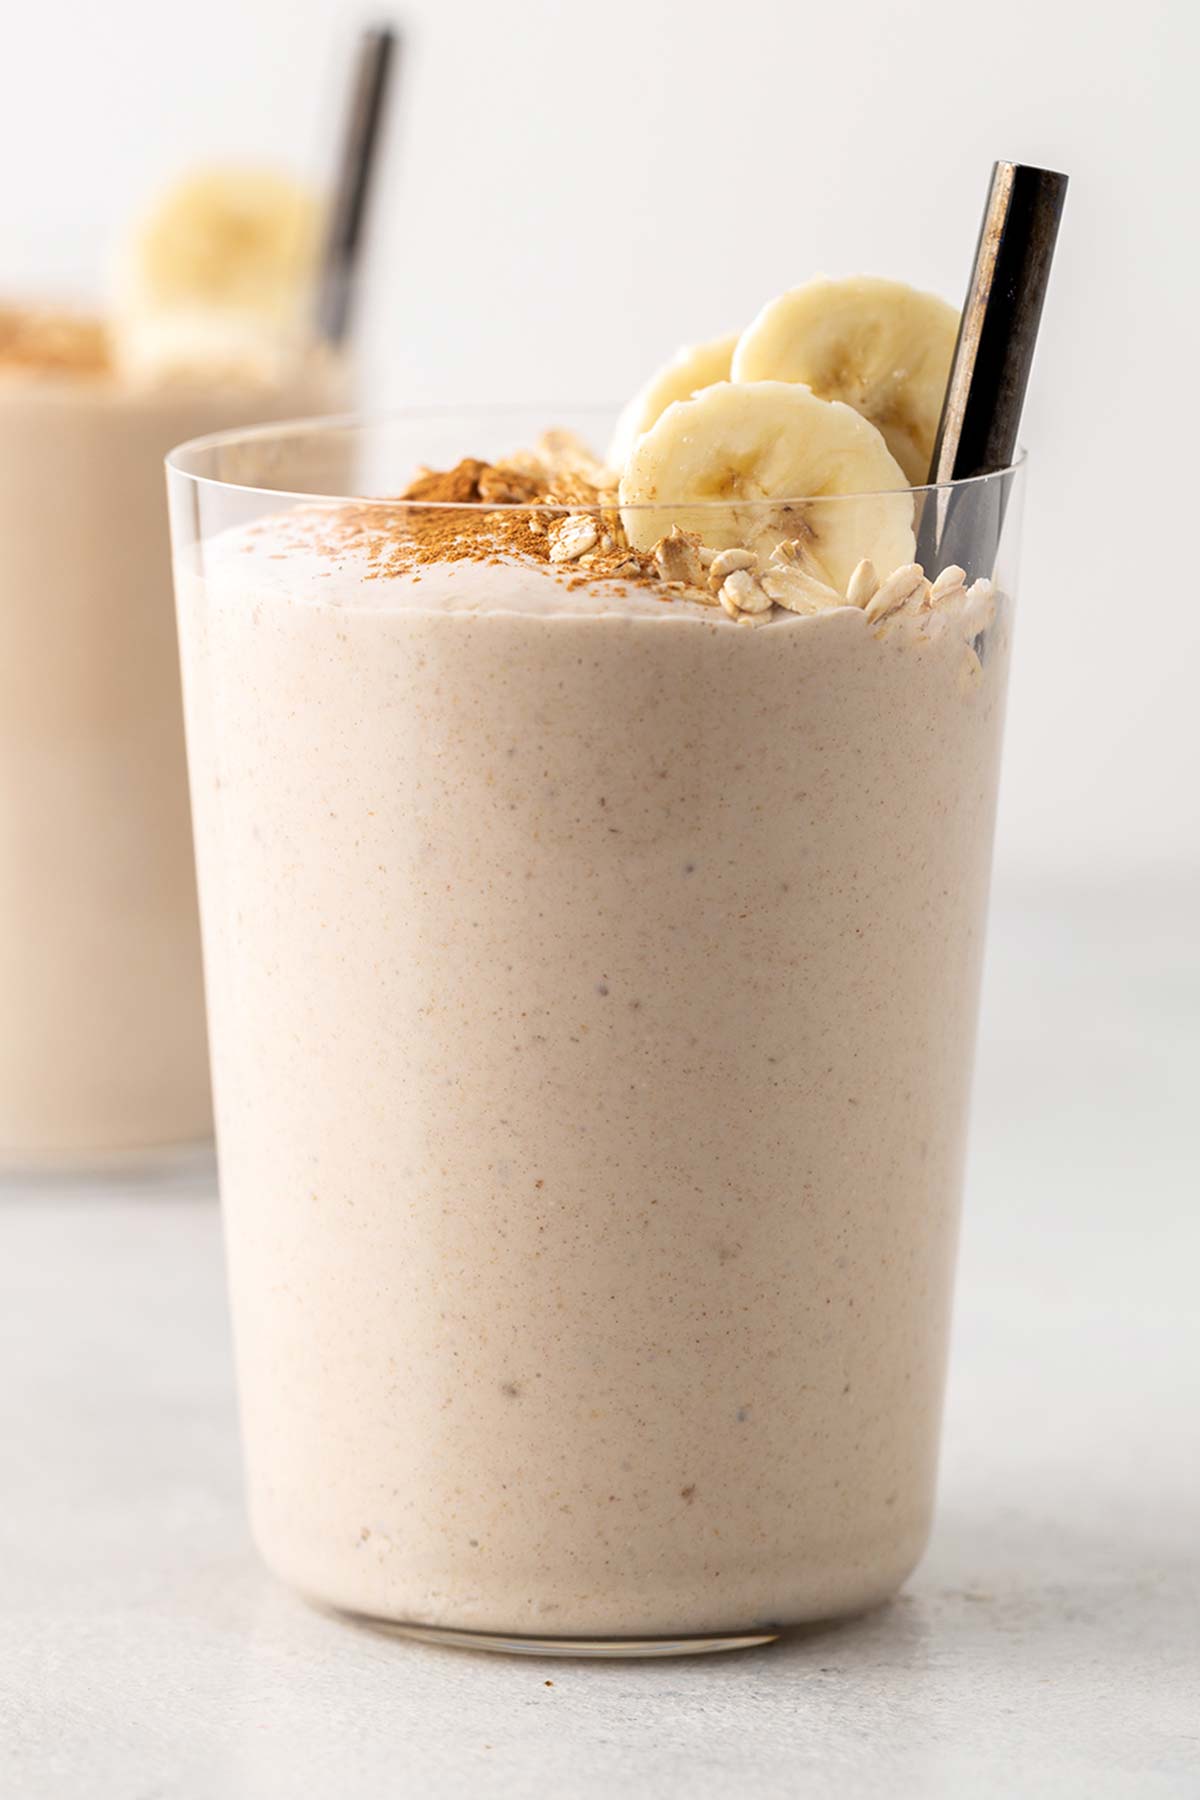 Oatmeal smoothie in a glass cup.